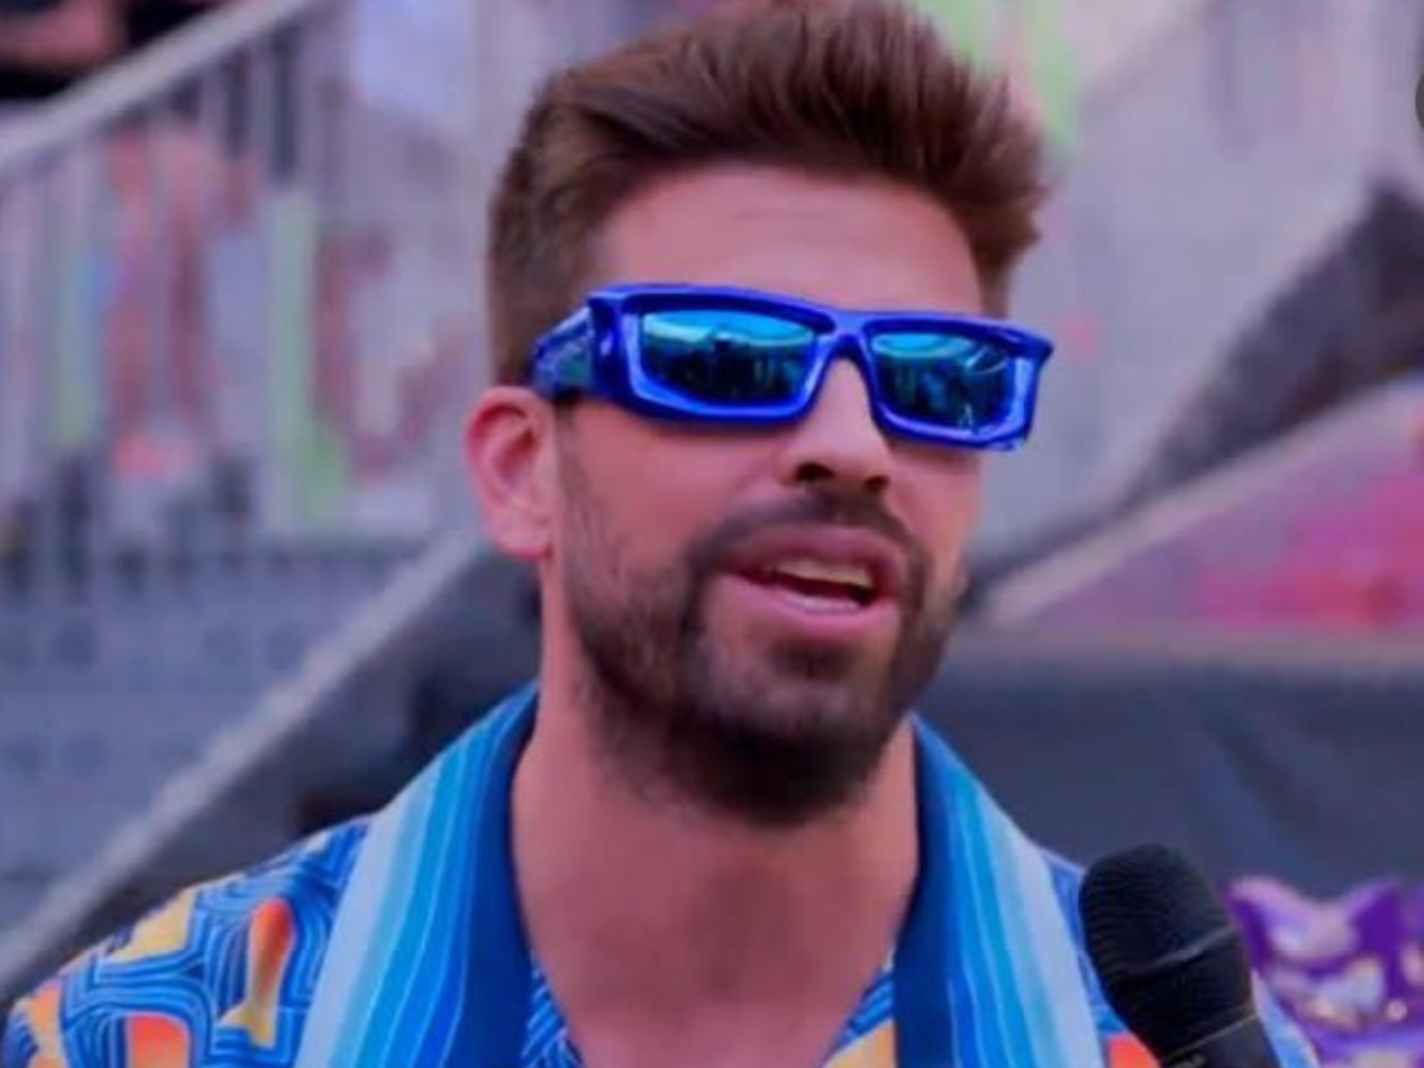 Loving the Casablanca Shirt and Off-White Glasses Gerard Pique Wore in Madrid? Here’s What It Costs